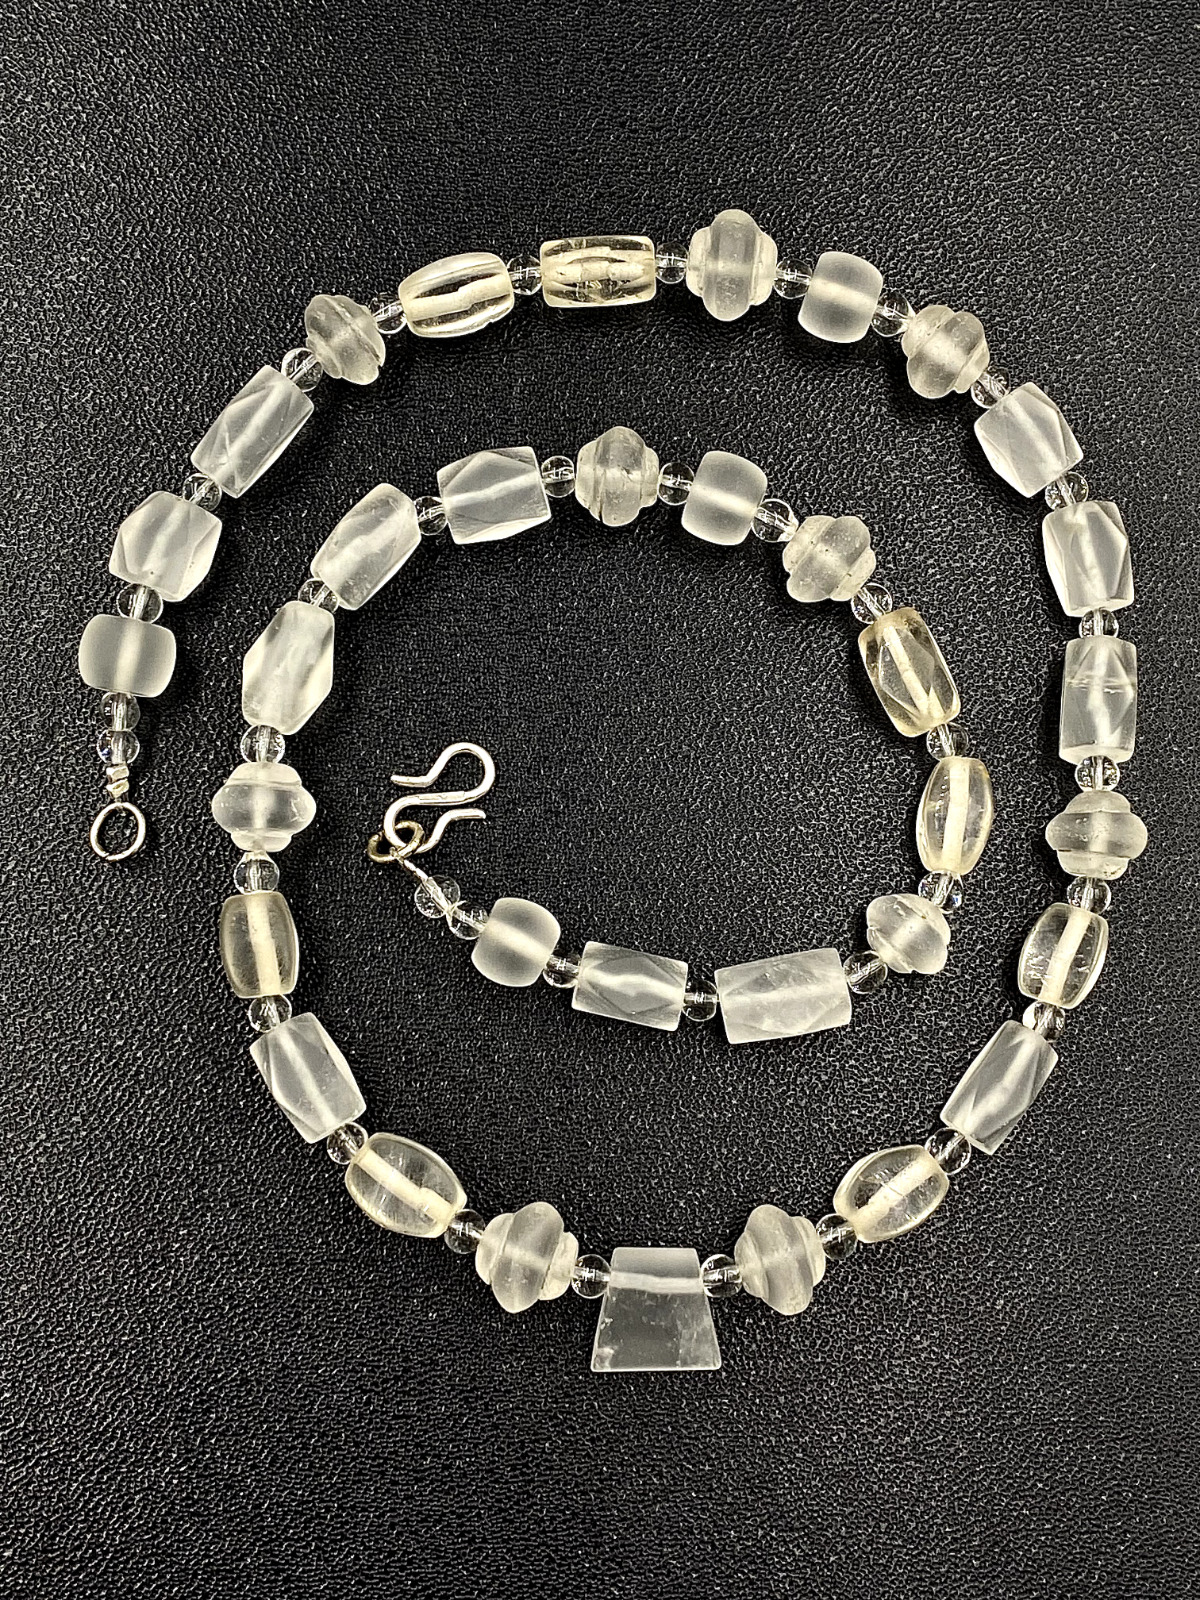 Unique Rare Crystals necklace From Ancient Romans and Greeks times